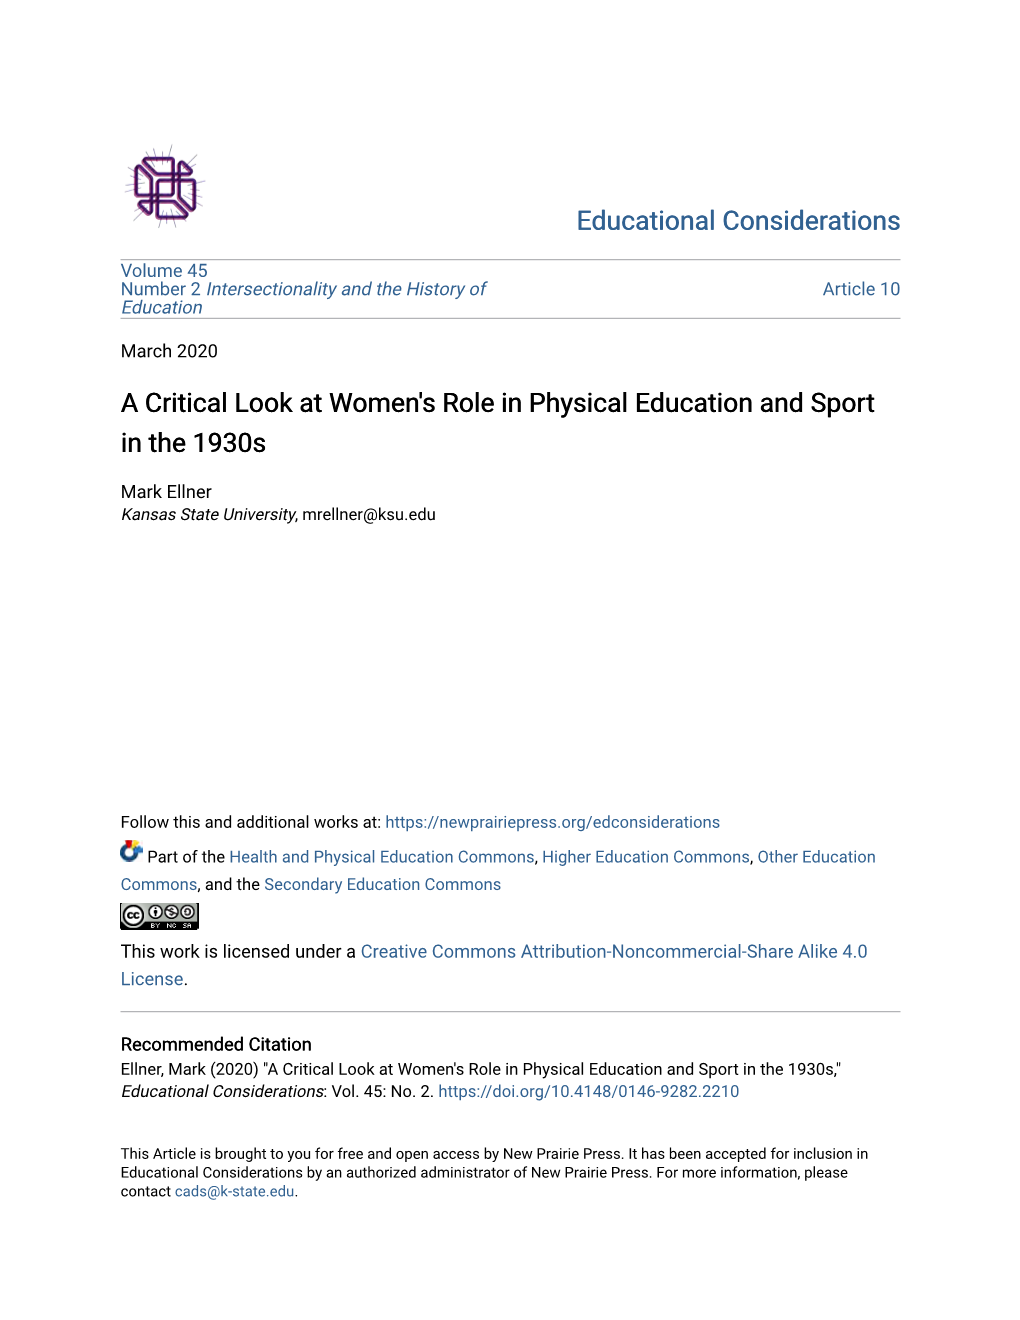 A Critical Look at Women's Role in Physical Education and Sport in the 1930S," Educational Considerations: Vol